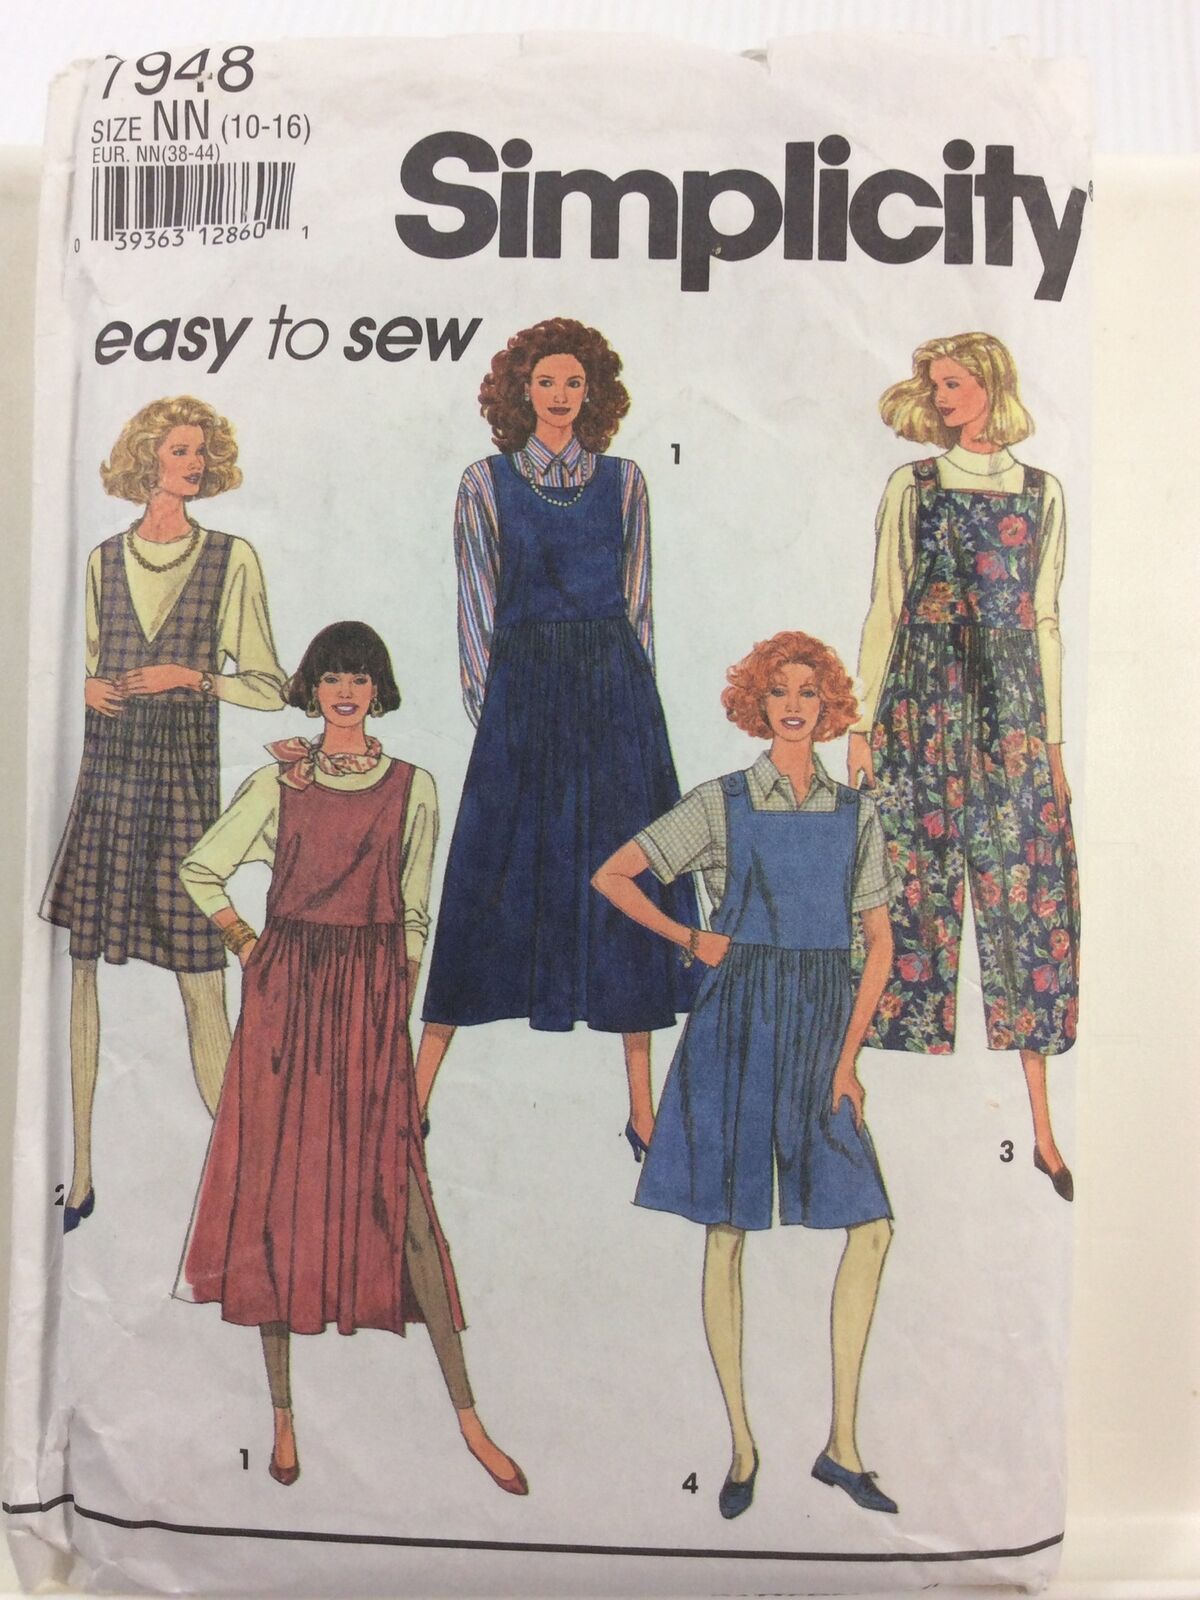 1992 Simplicity 7948 VTG Sewing Pattern Women Jumpers 2 Lengths Size NN 10 16